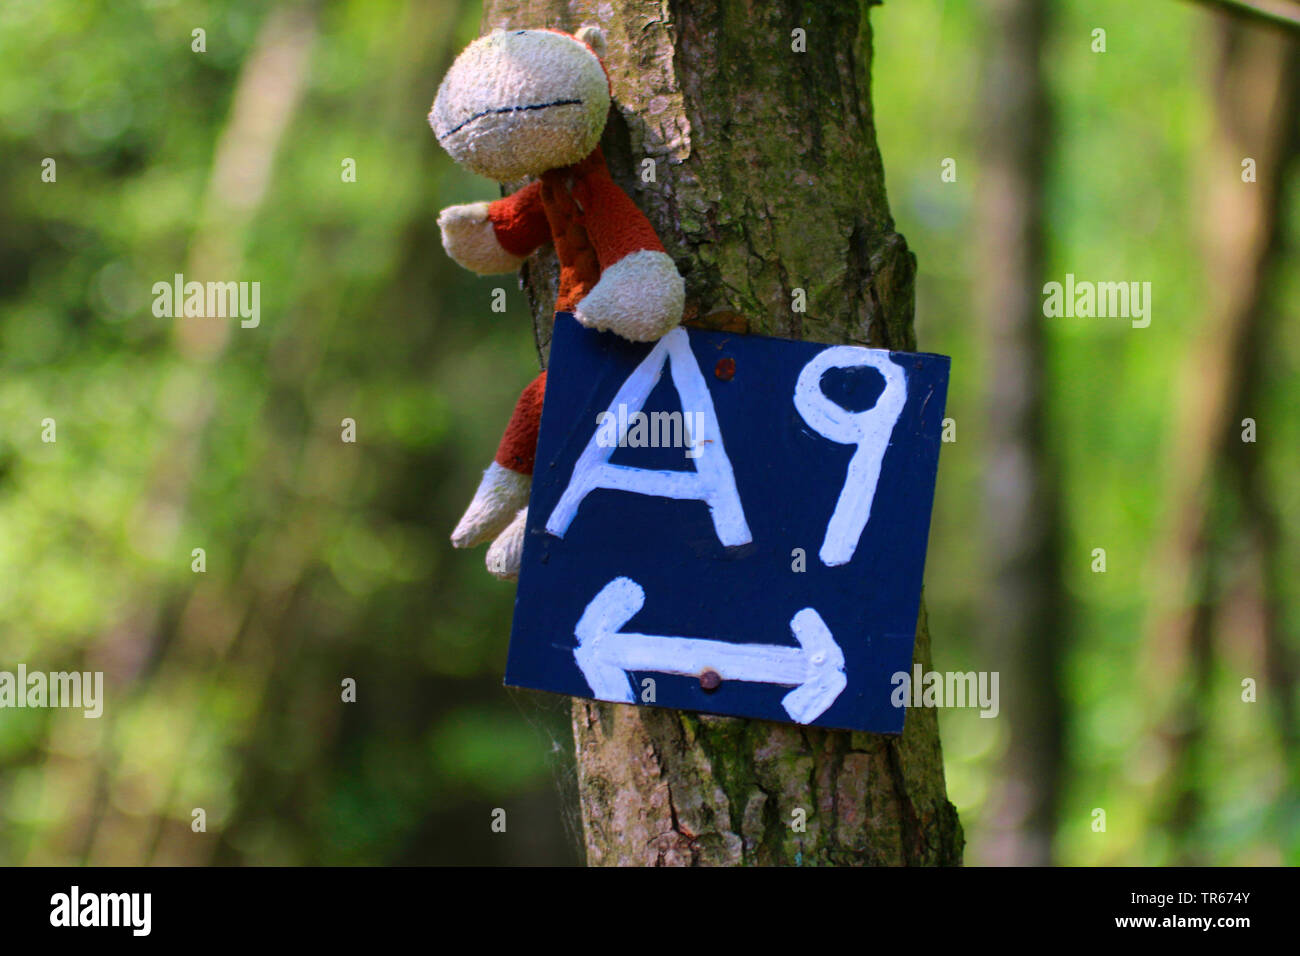 hiking sign with a cuddly toy, Germany Stock Photo